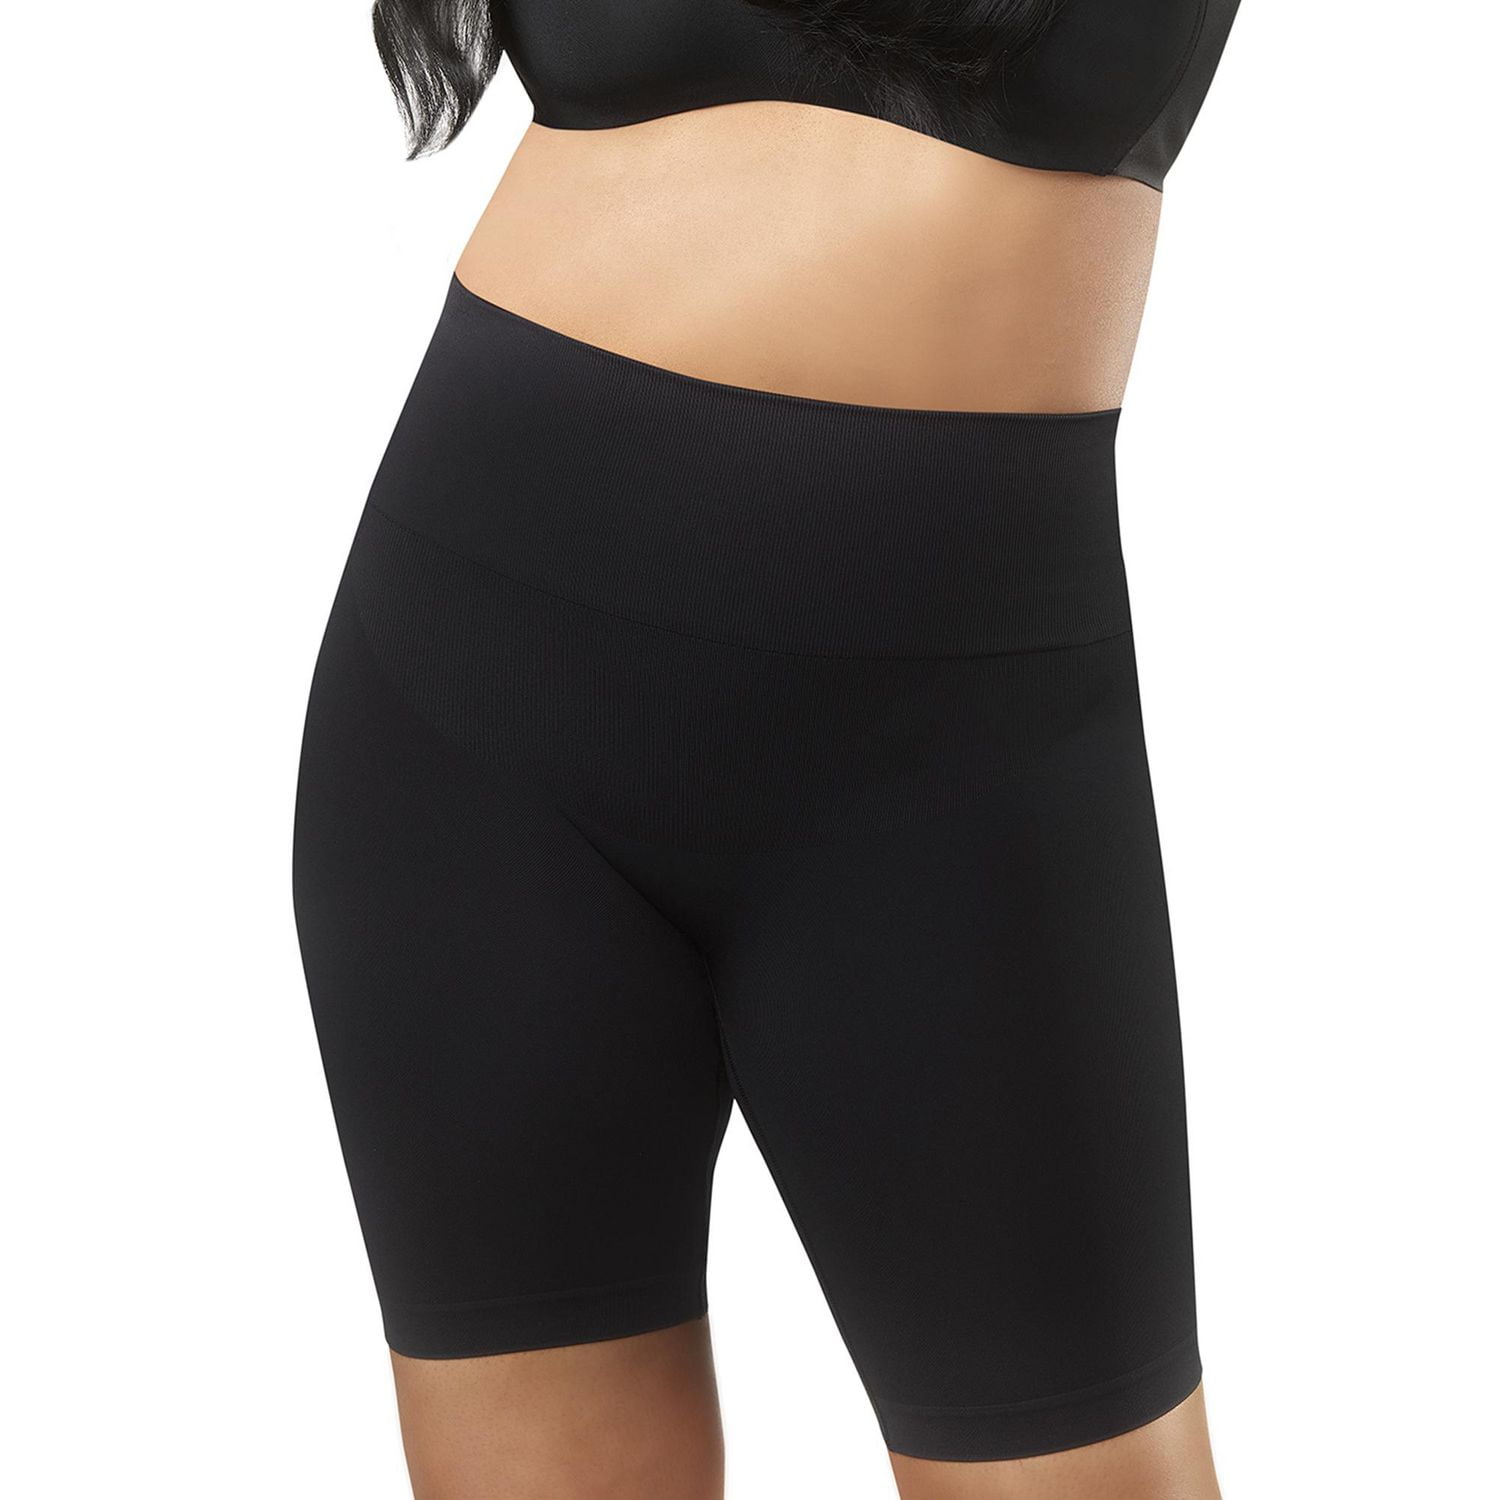 Up to 65% OFF Comfortable Shapewear At Great Prices!⁠ ⁠ SHOP NOW